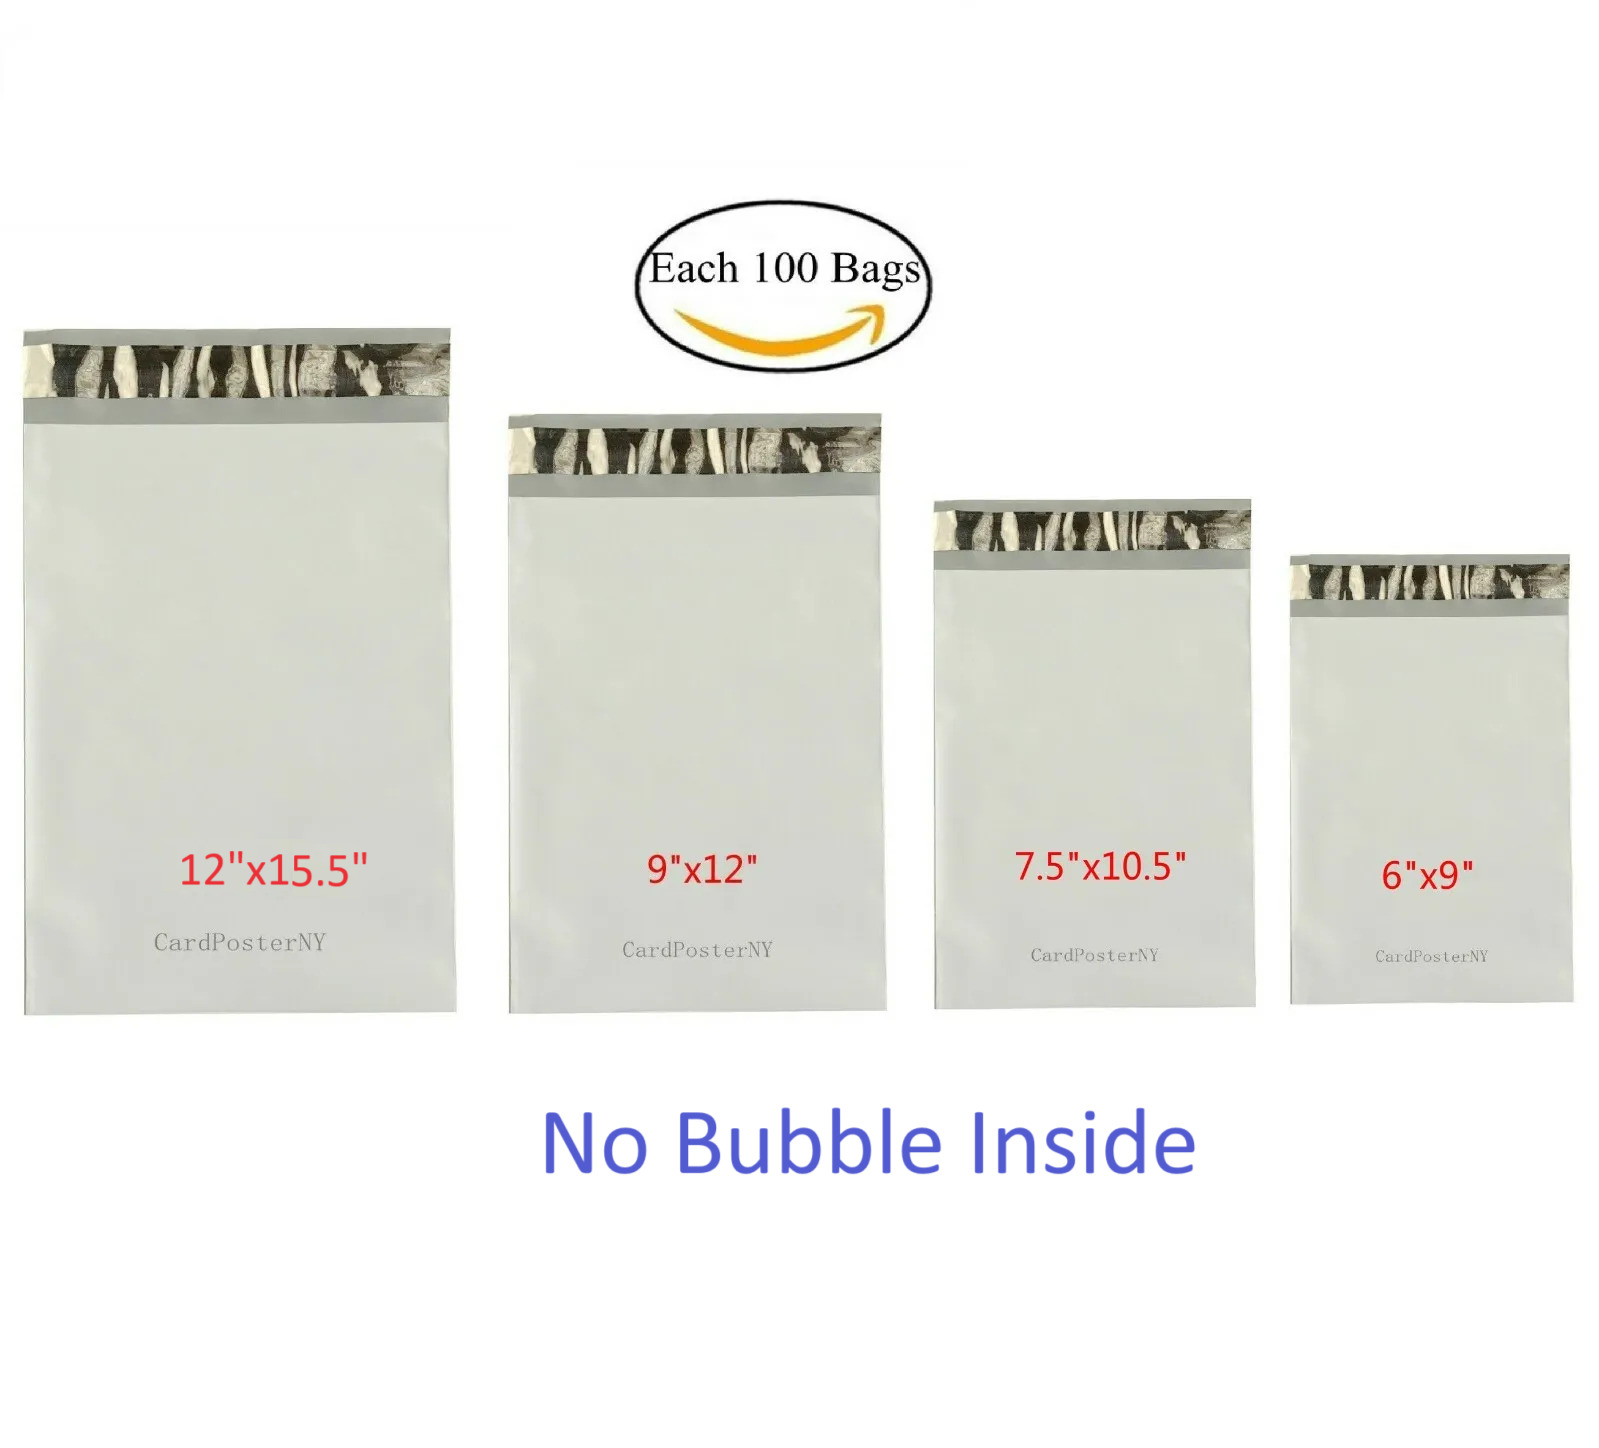 Each 100 6x9 7.5x10.5 9x12 12x15.5 Poly Mailers Shipping Envelopes Sealing Bags 